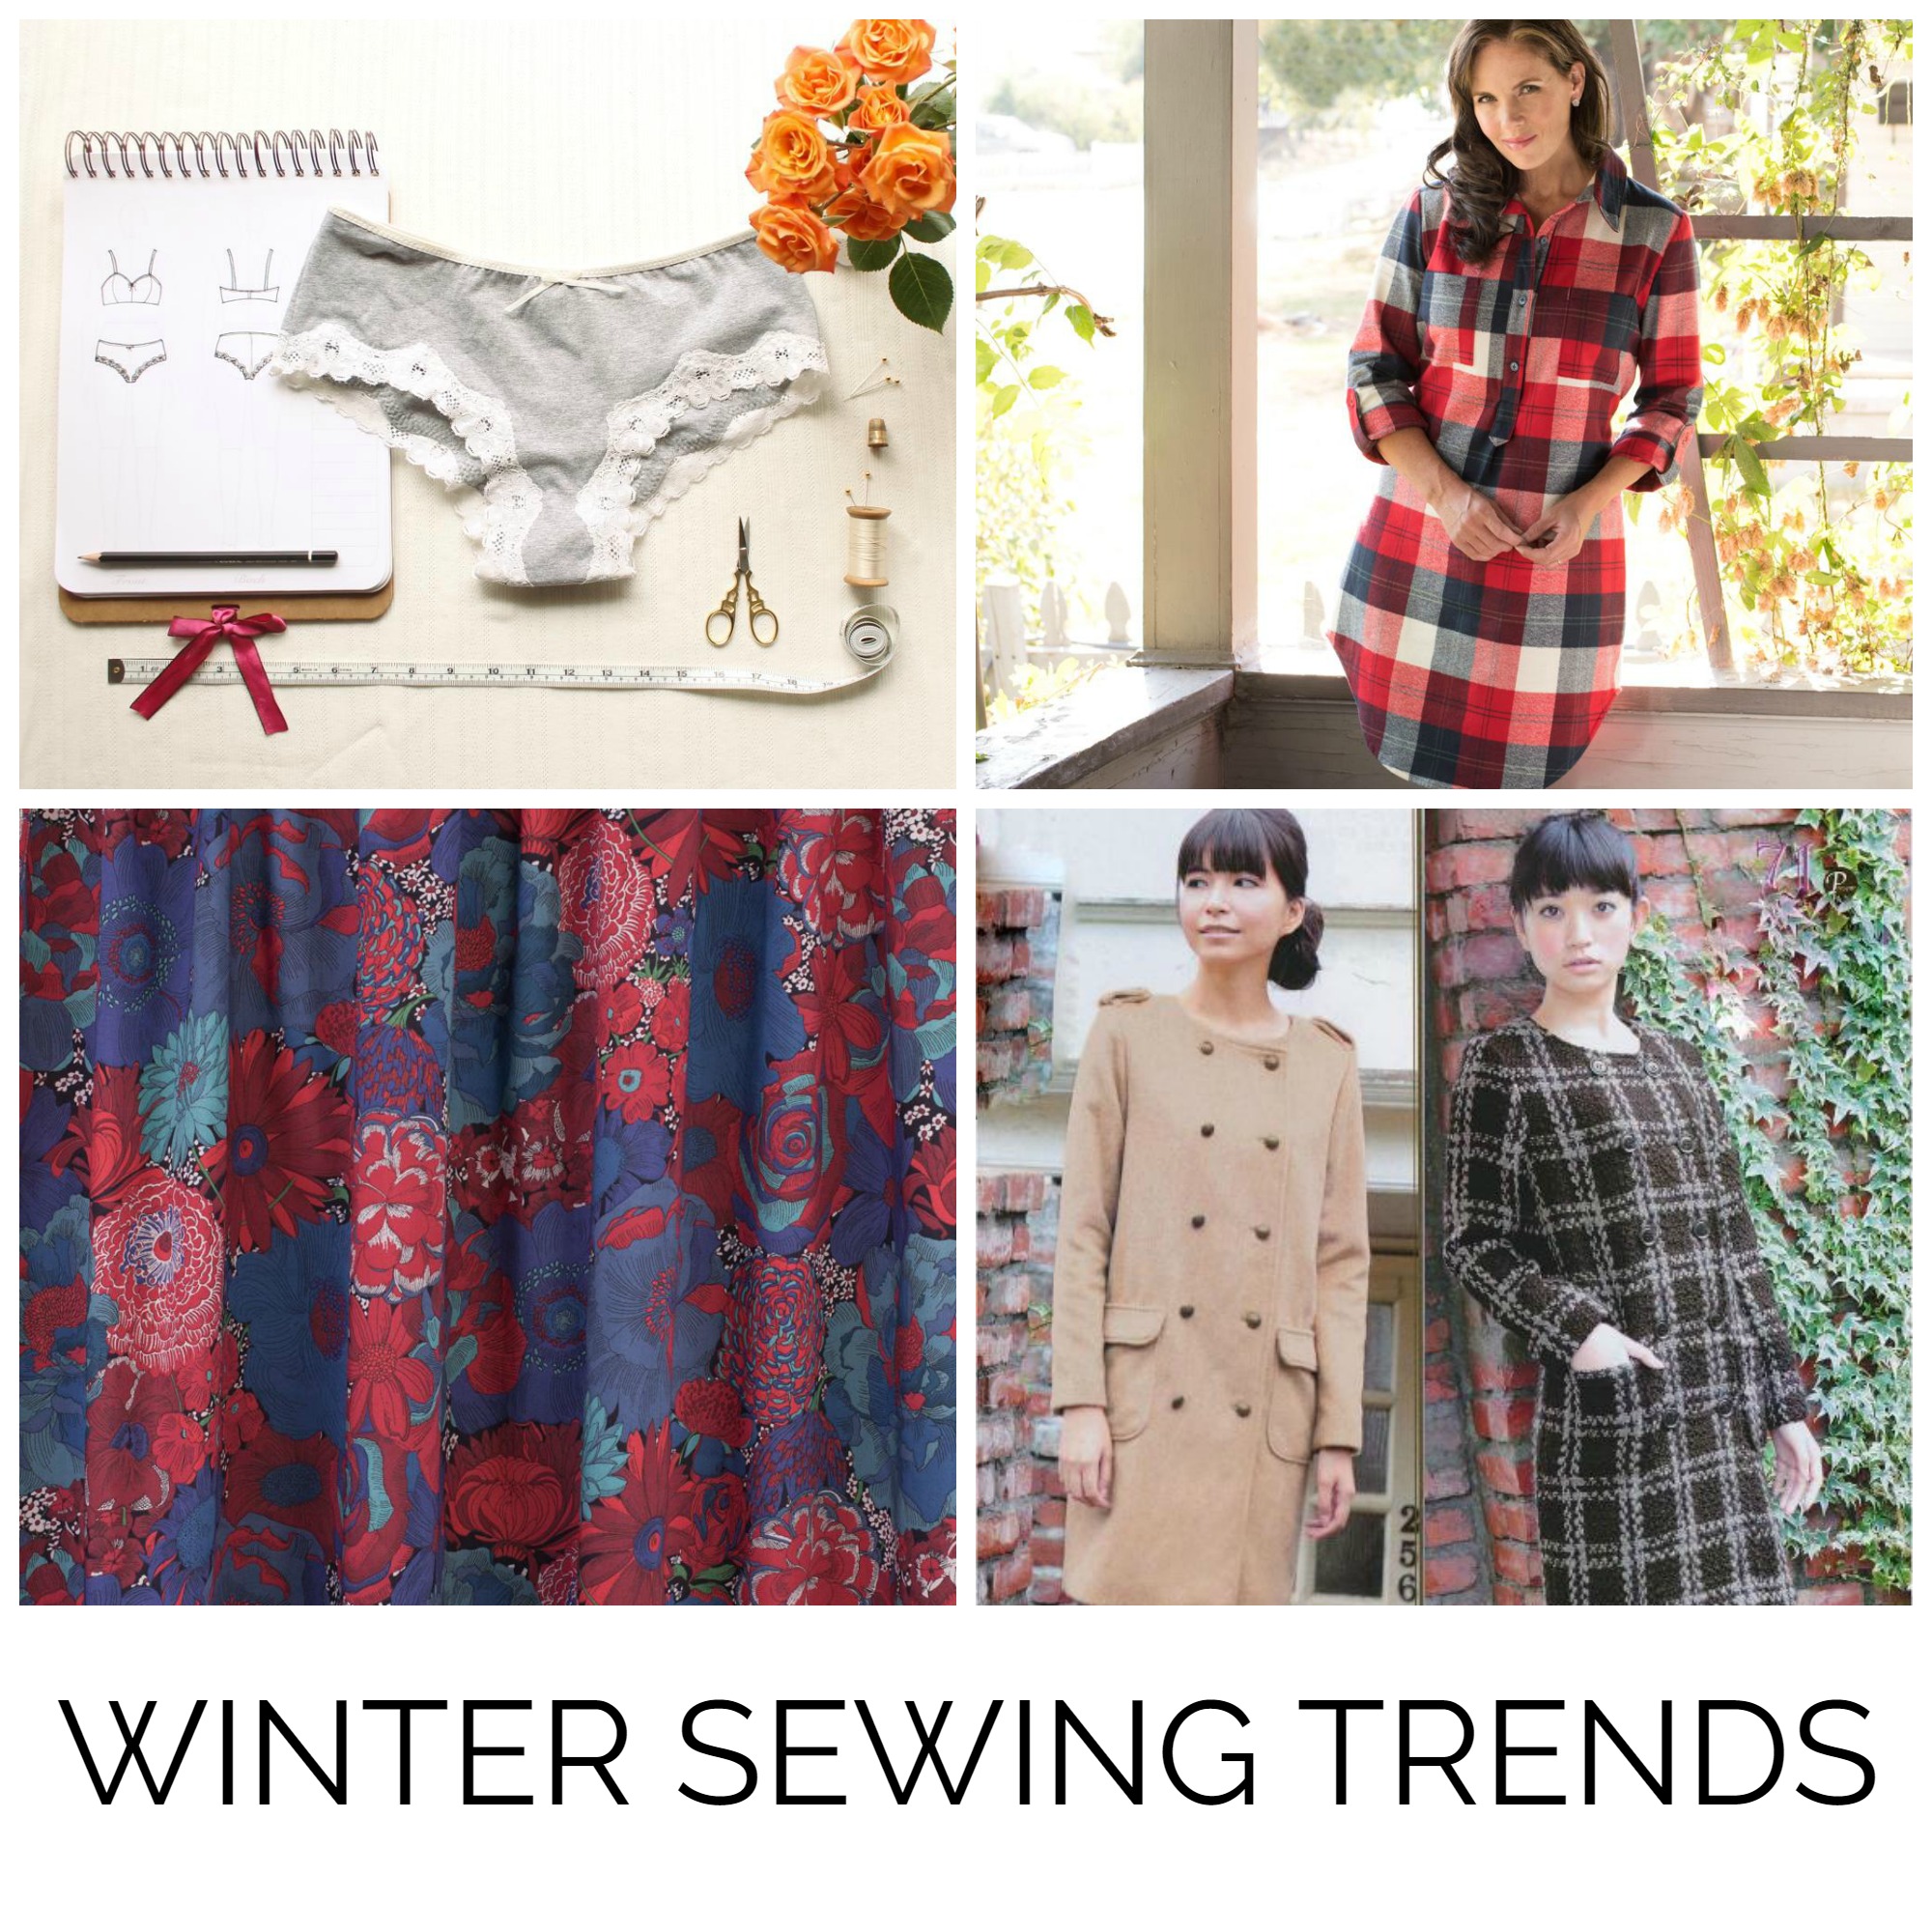 Winter Sewing Trends